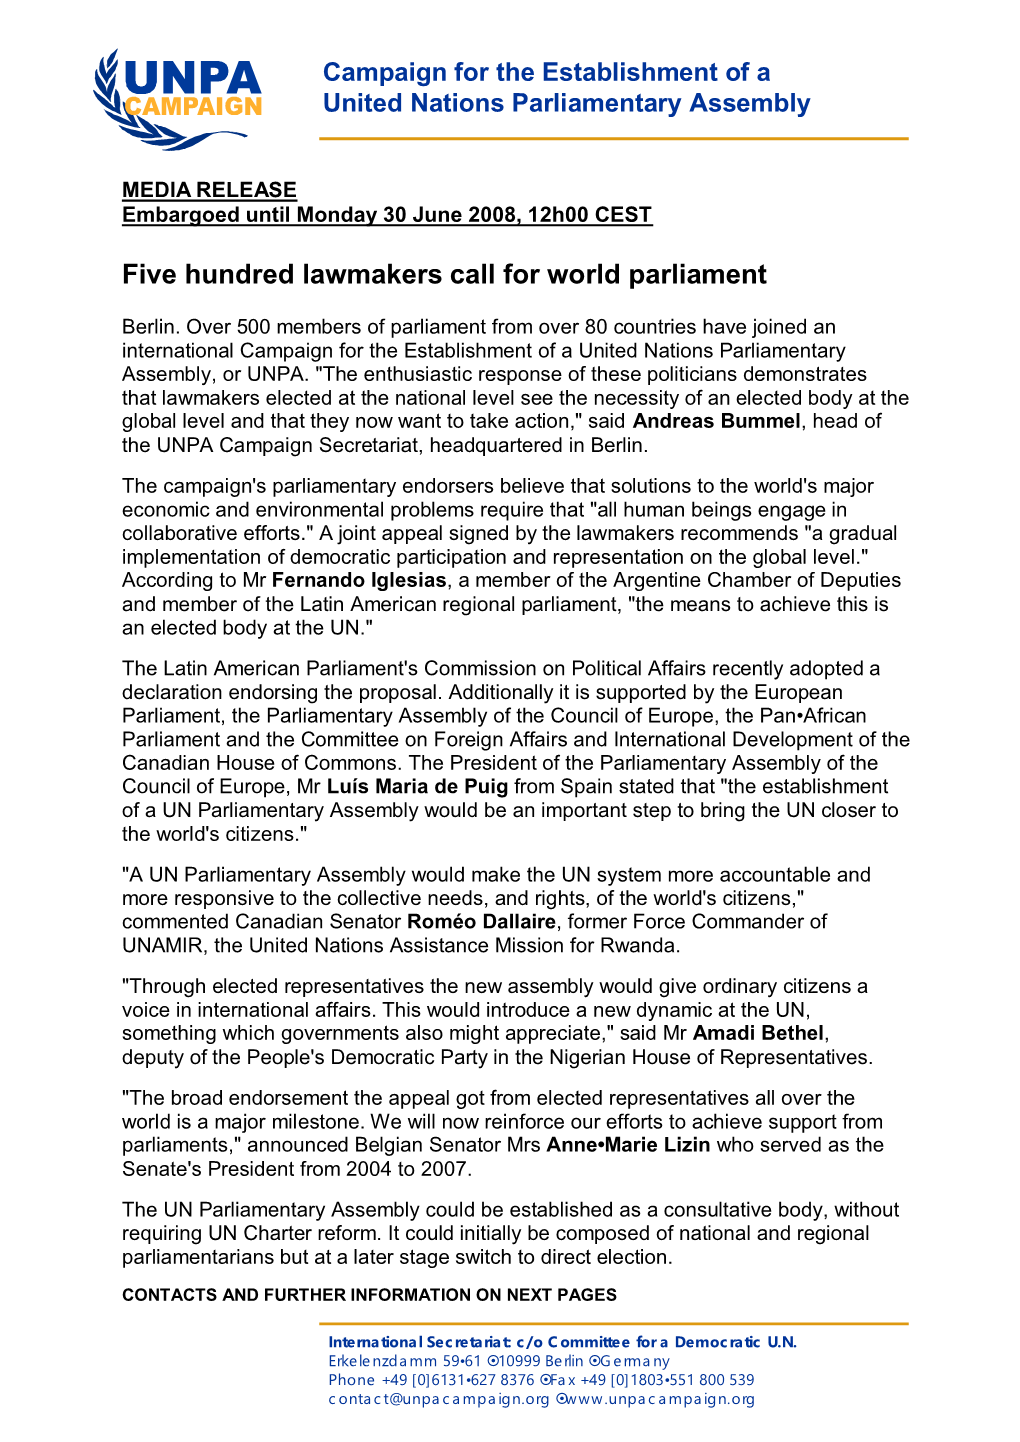 Five Hundred Lawmakers Call for World Parliament